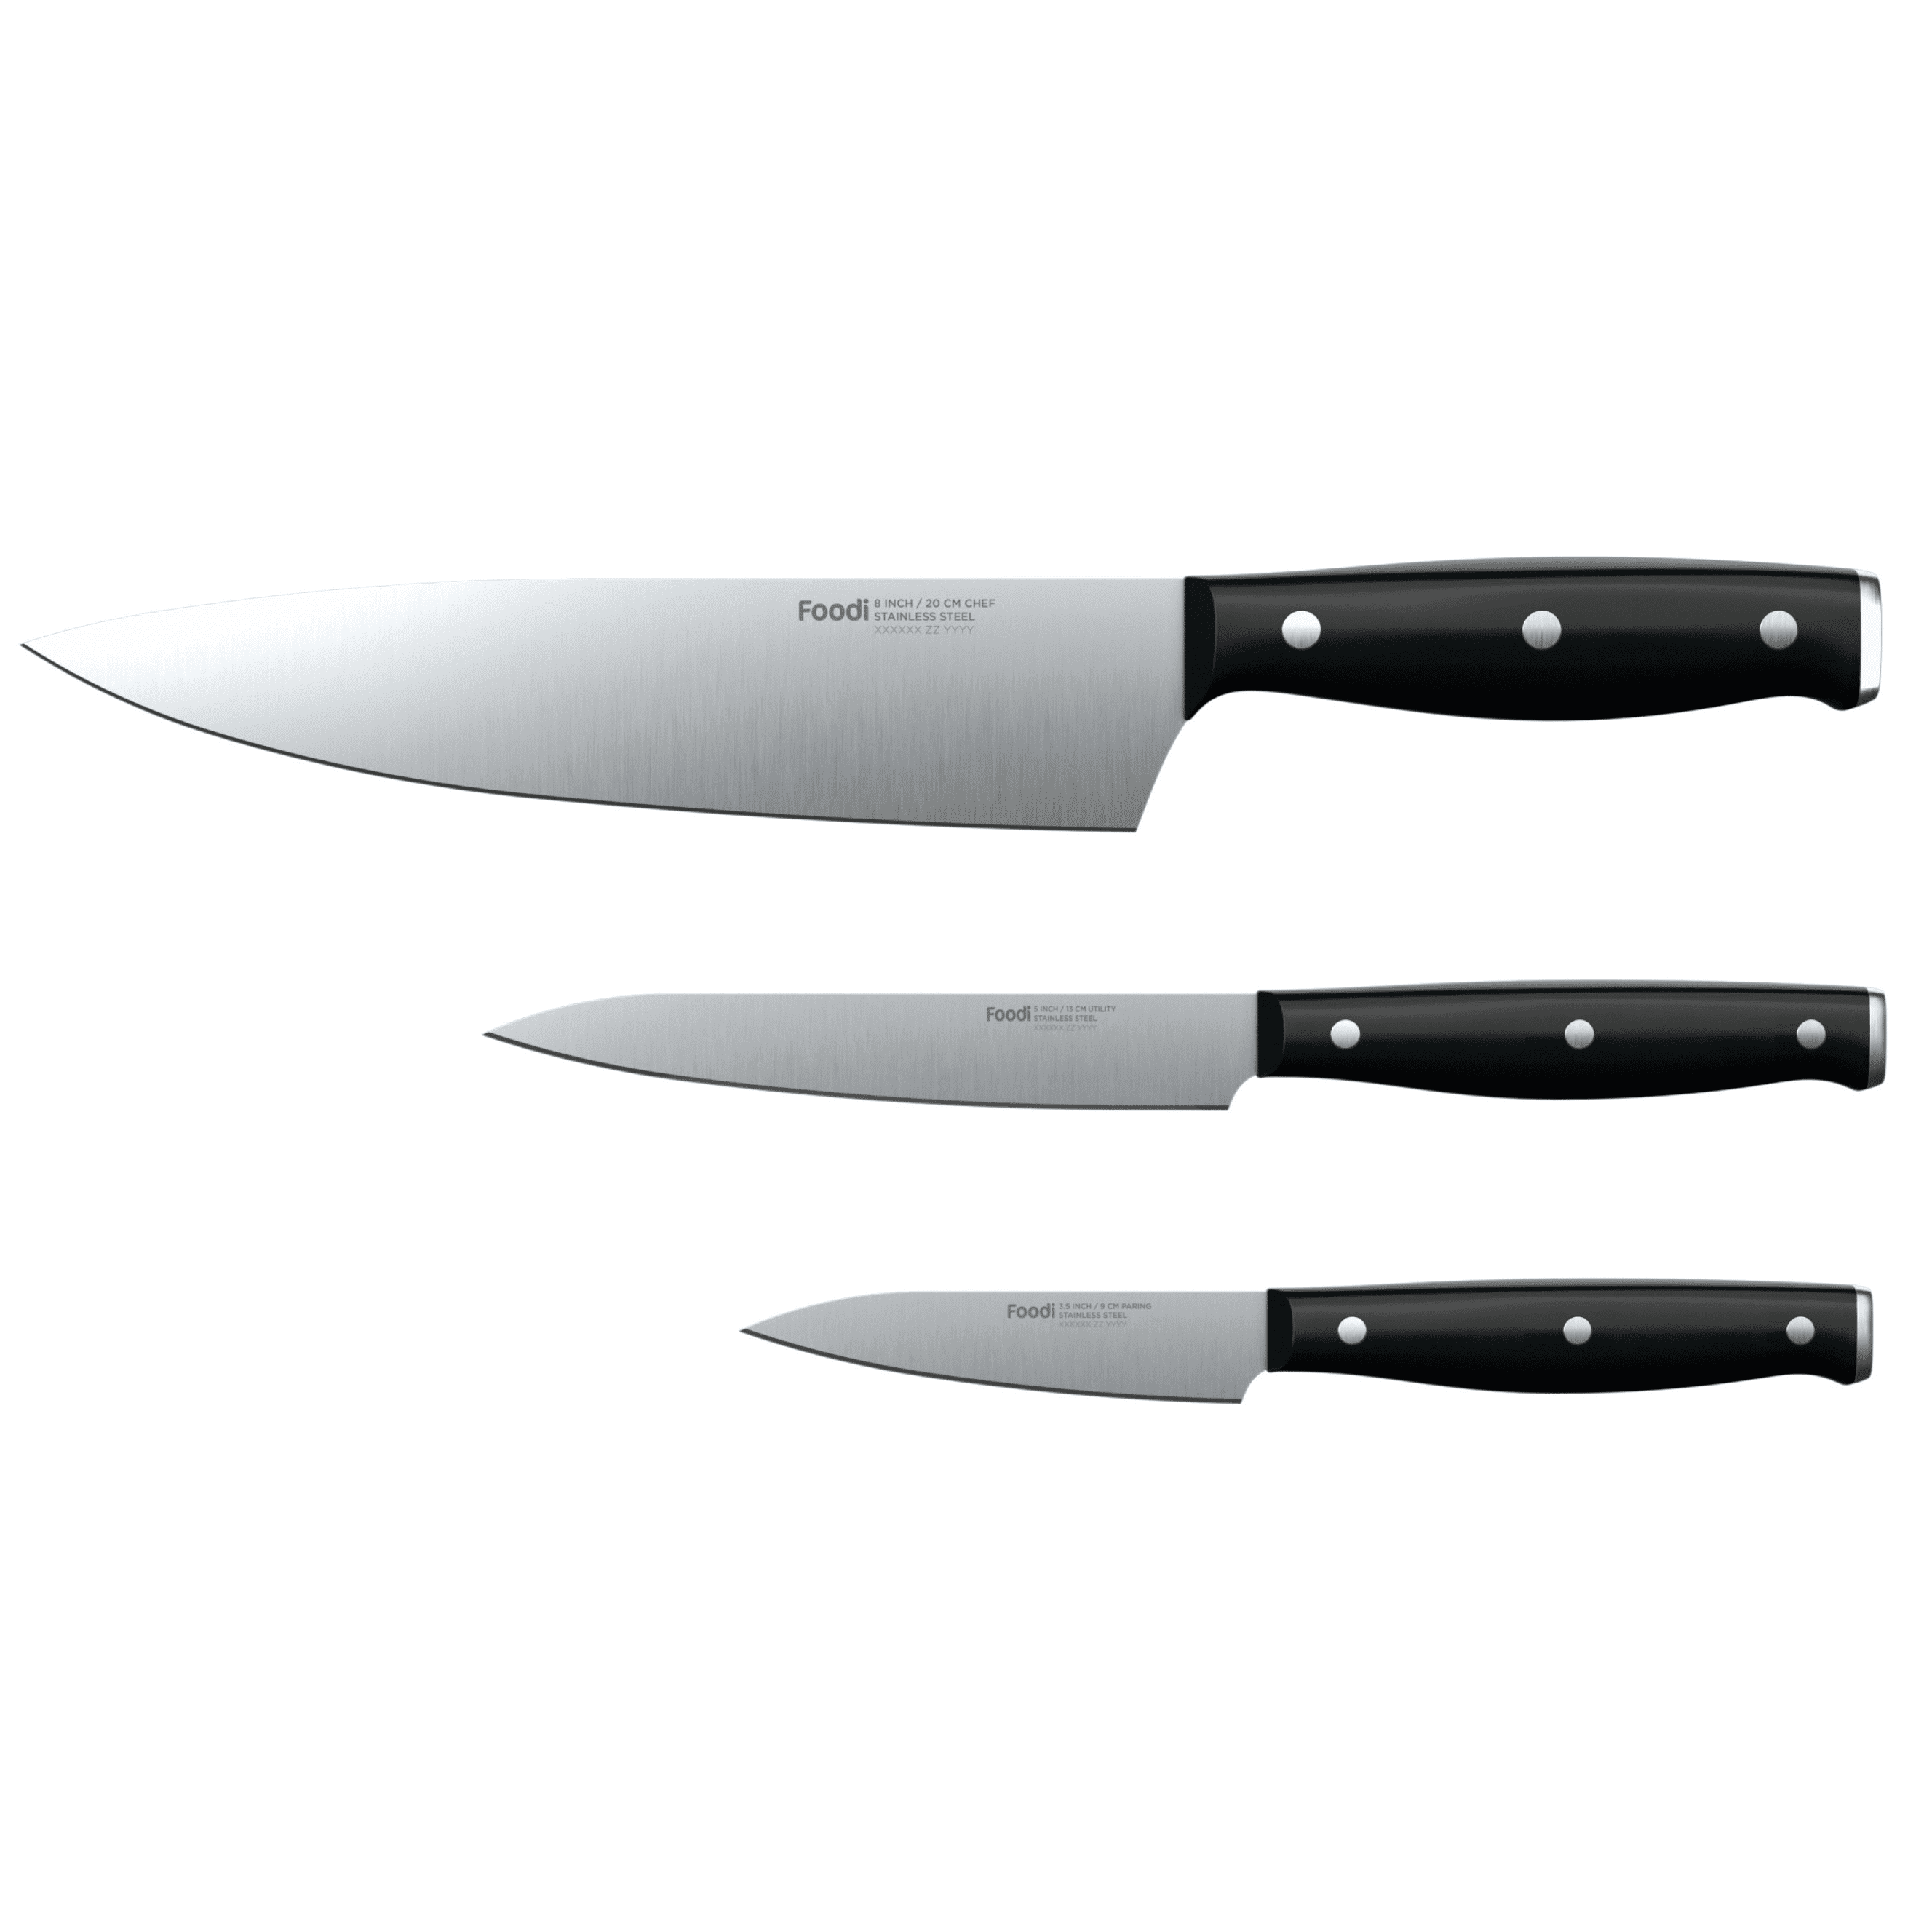 Ninja Foodi Never Dull Essential 3-Piece Set with Chef, Utility & Paring Knives, K12003